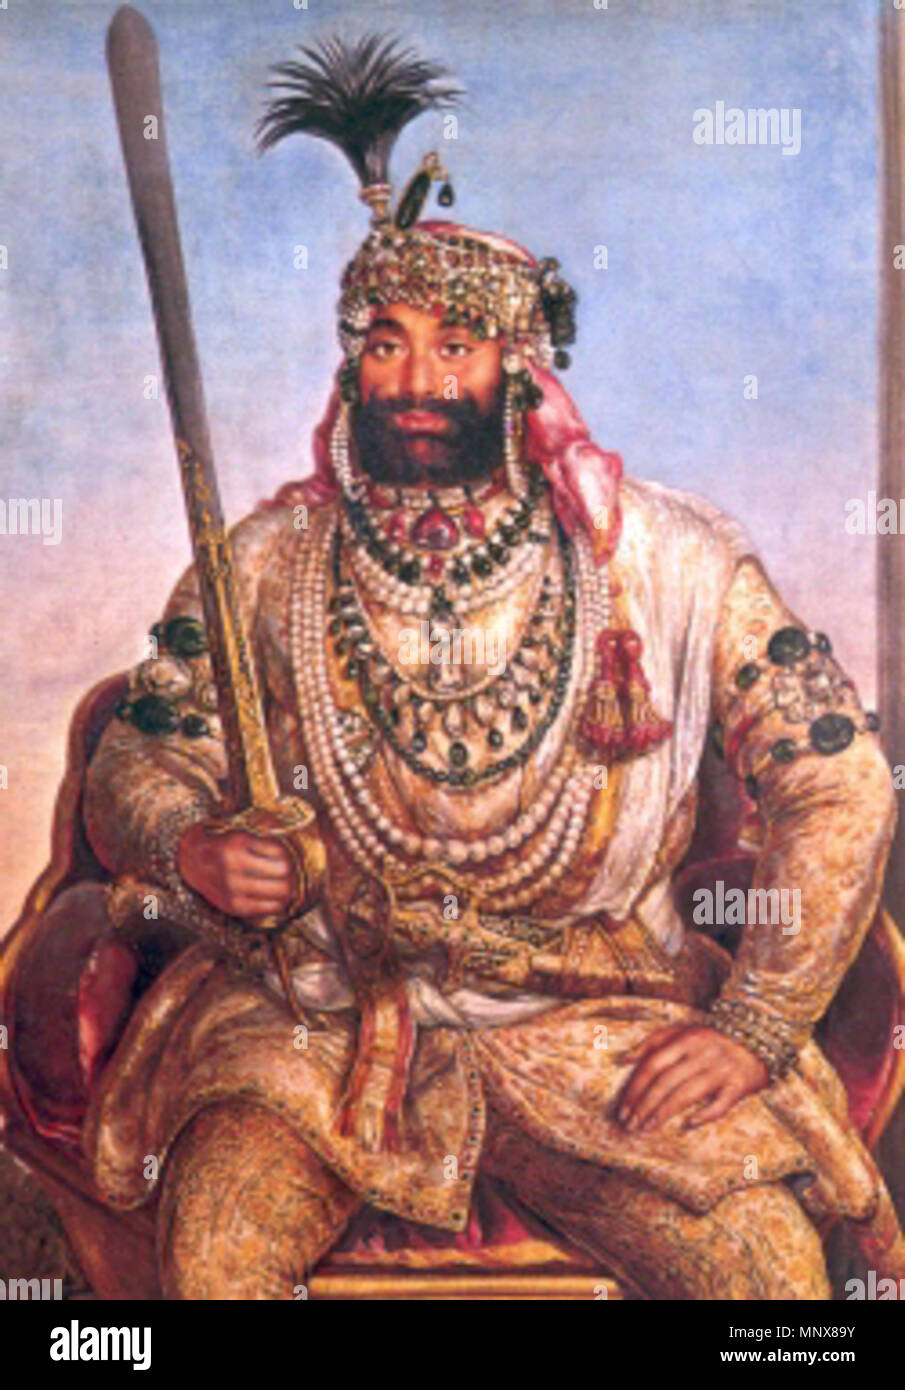 Maharaja Sher Singh seated on the golden throne of Maharaja Ranjit Singh.  English: Painting made in Vienna, from preliminary study made in Lahore 1841. . circa 1840's - 1855.    Ágoston Schoefft  (1809–1888)     Alternative names Josef August Schoefft  Description Austro-Hungarian painter  Date of birth/death 1809 1888  Location of birth/death Pest London  Work location India, Iran, London, Mexiko, United States of America  Authority control  : Q15525117 VIAF: 95868197 ISNI: 0000 0000 6893 3801 ULAN: 500030254 GND: 1031831878 RKD: 70831 1114 Sher Singh Stock Photo